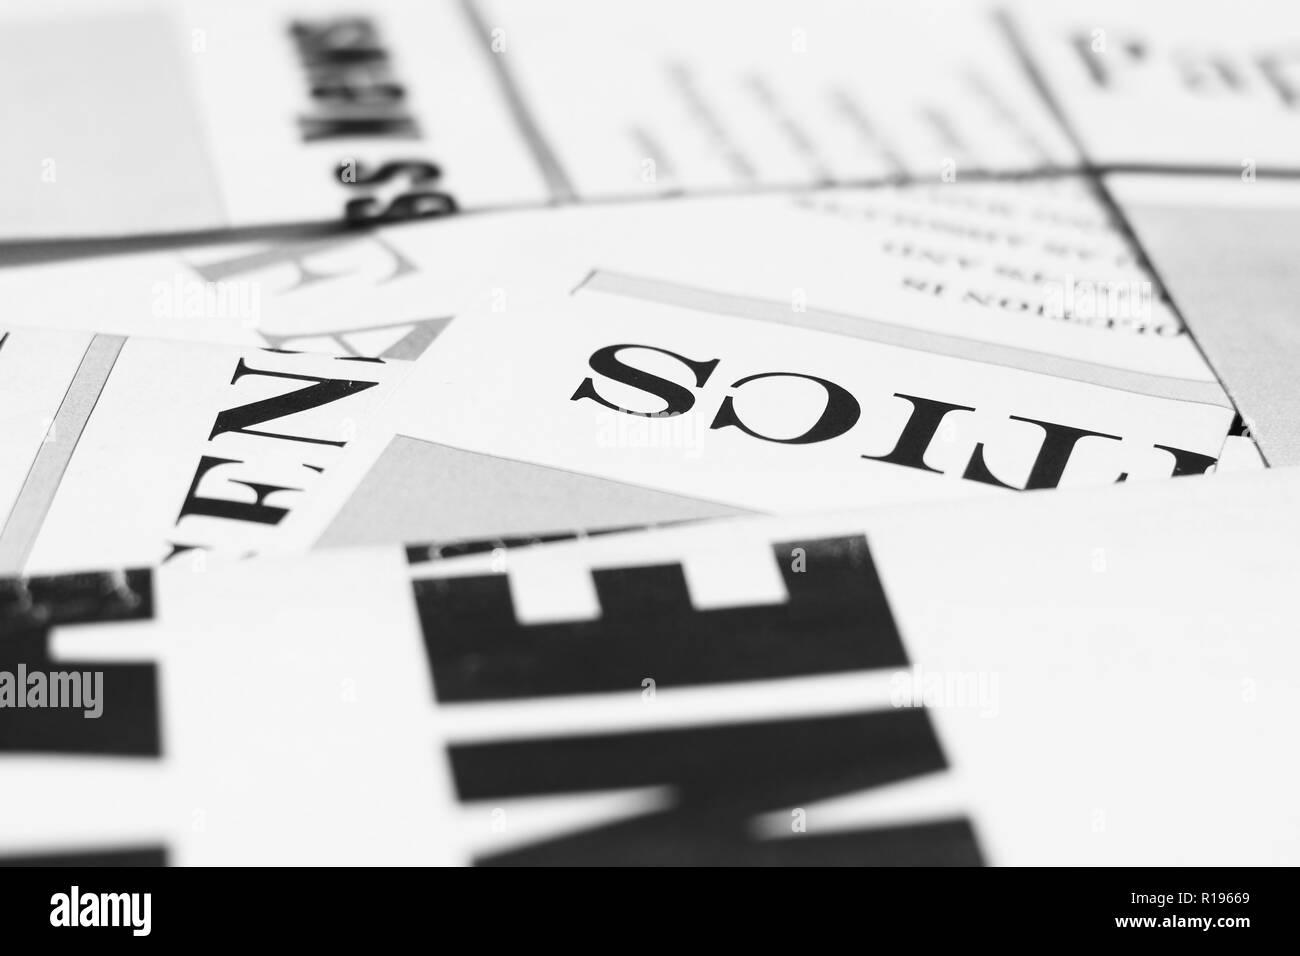 Business news on pages of journals and magazines. Newspapers with headlines and articles scattered on horizontal surface, side view background texture Stock Photo